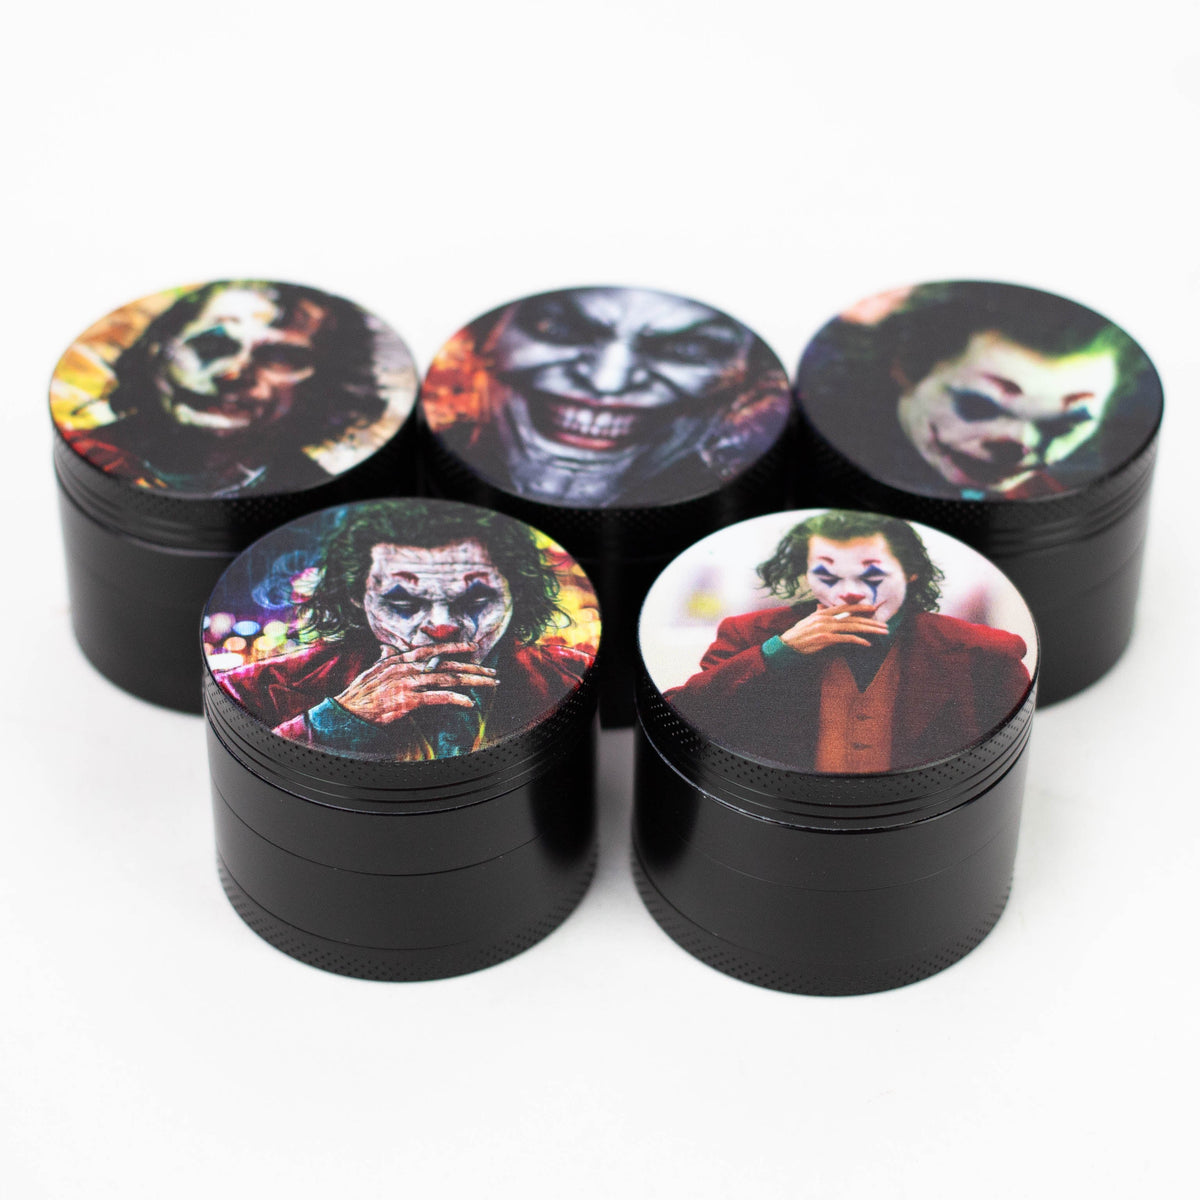 Assorted batman villain, Joker Herb Grinder mad from zinc alloy and has 4 parts with a stainless steel mess and scraper